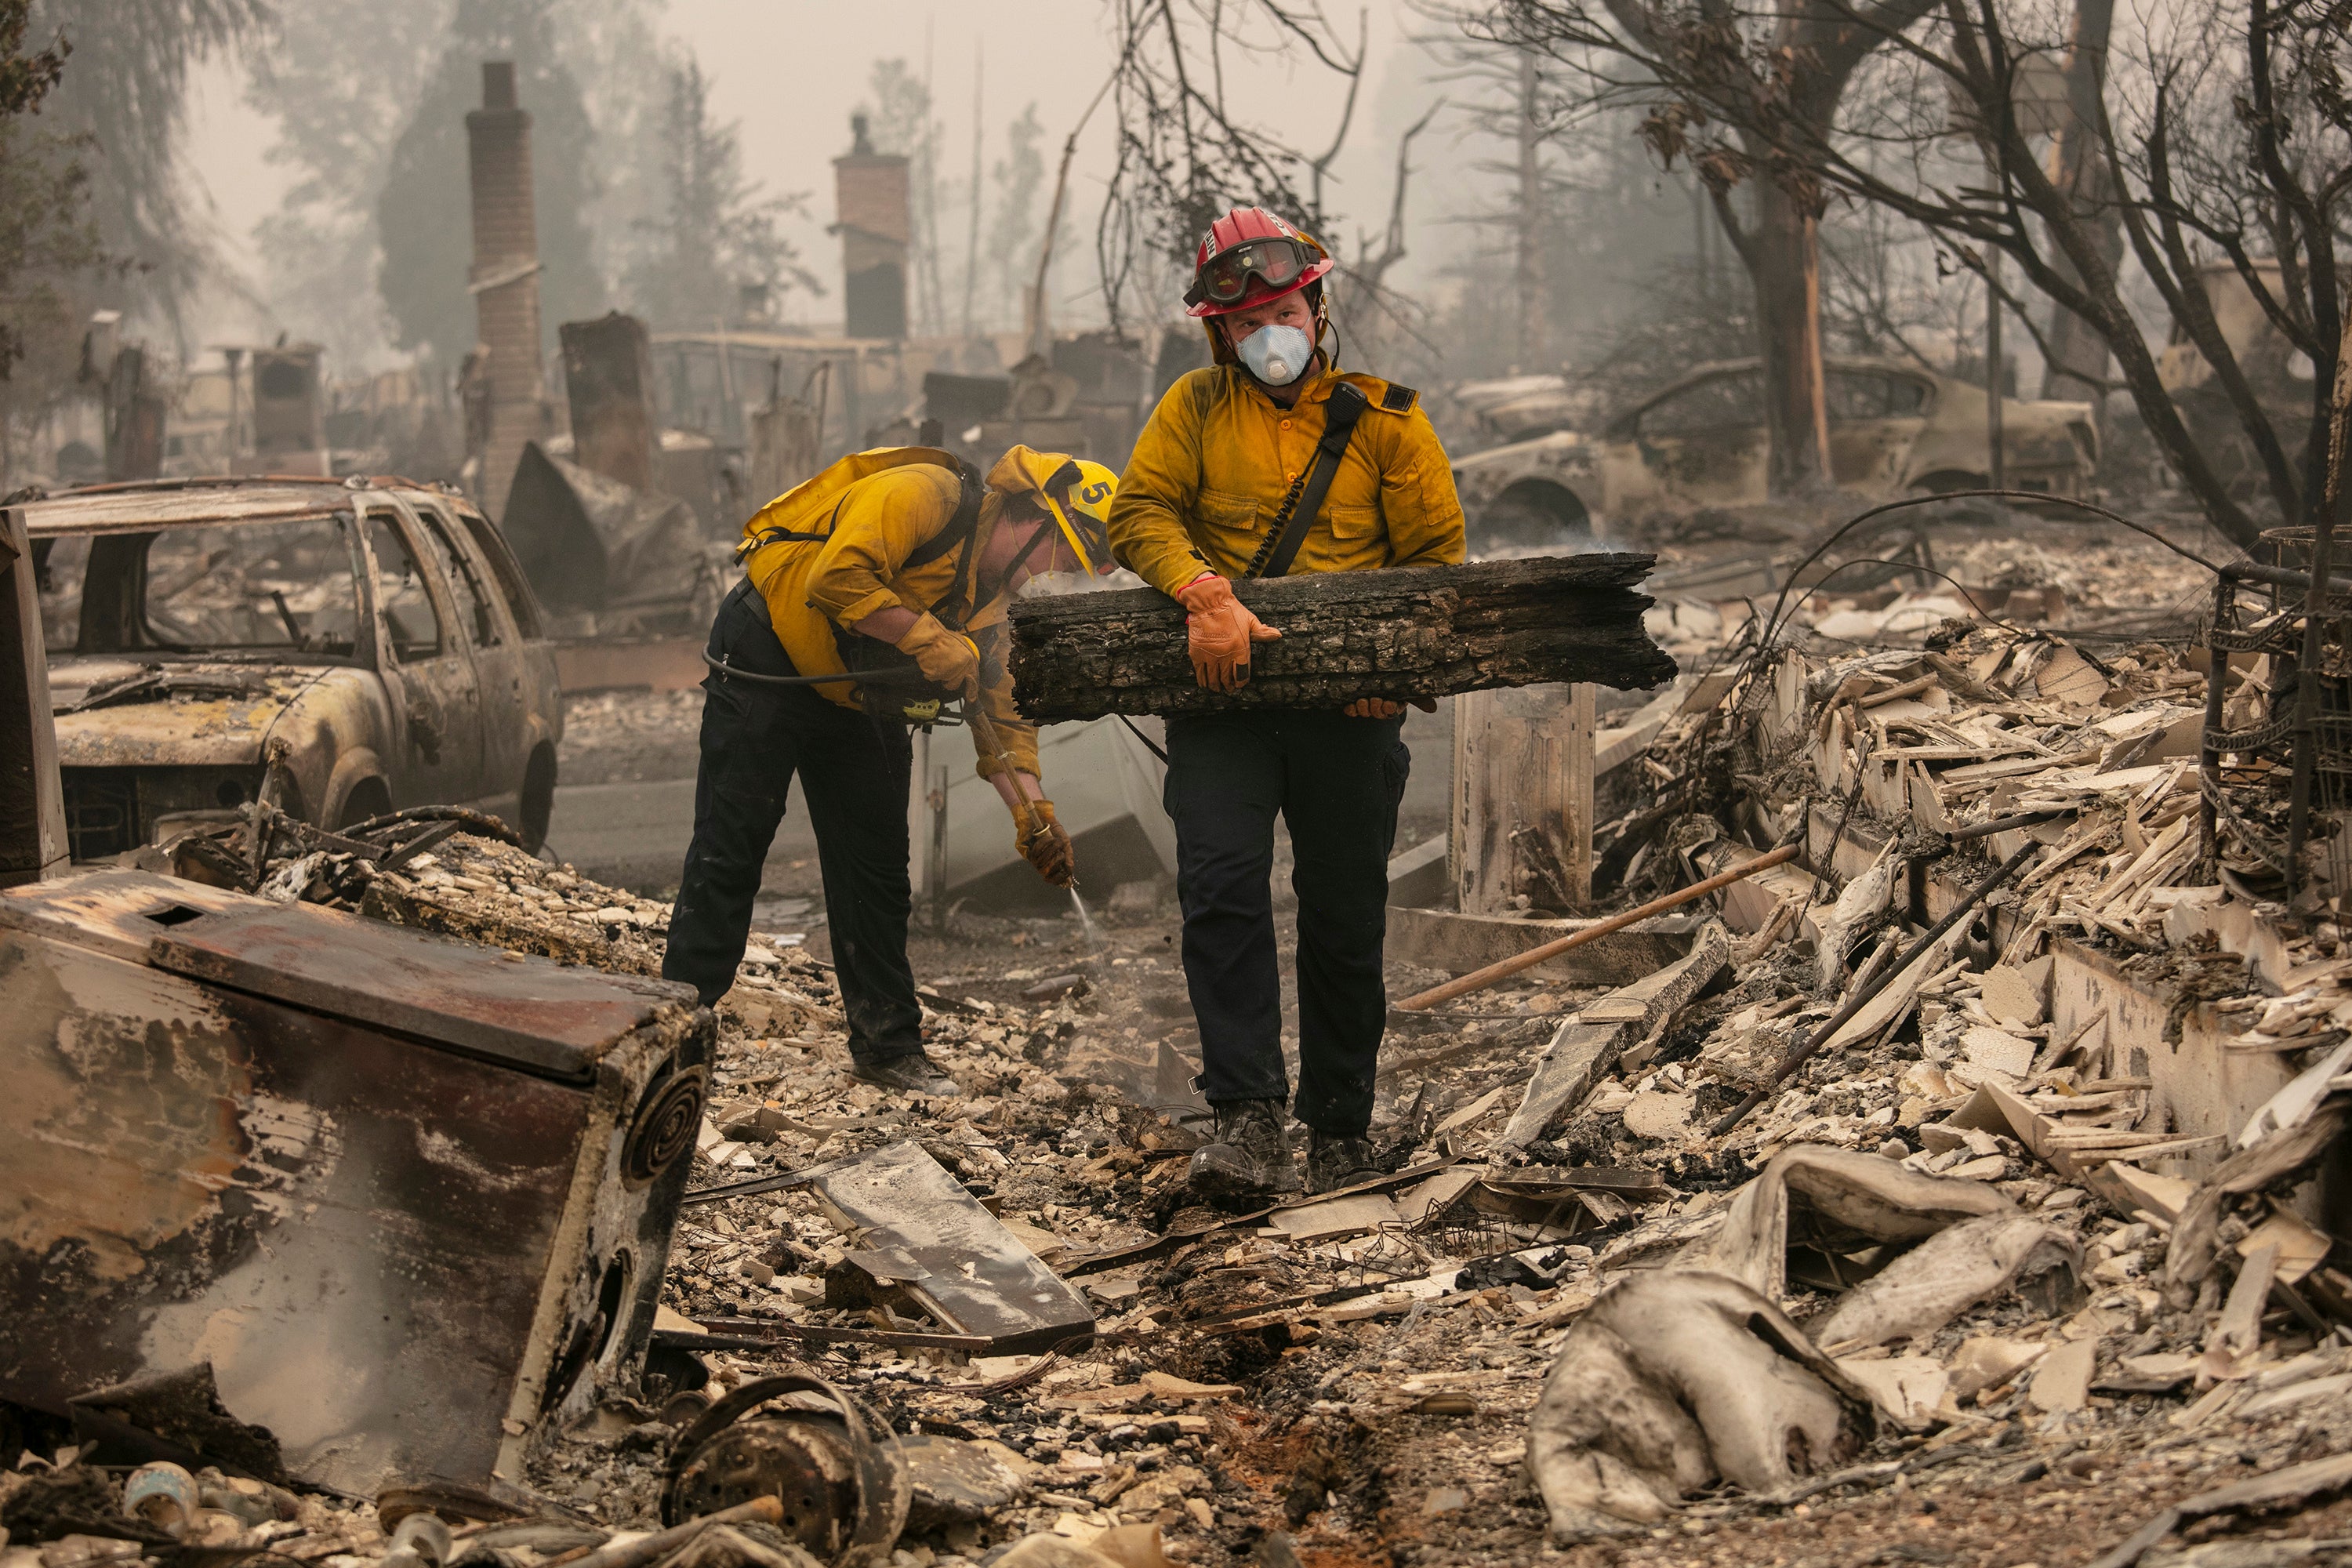 Jackson County District 5 firefighter Captain Aaron Bustard, right, and Andy Buckingham work on a smouldering fire in a burned neighbourhood as destructive wildfires devastate the region on Friday